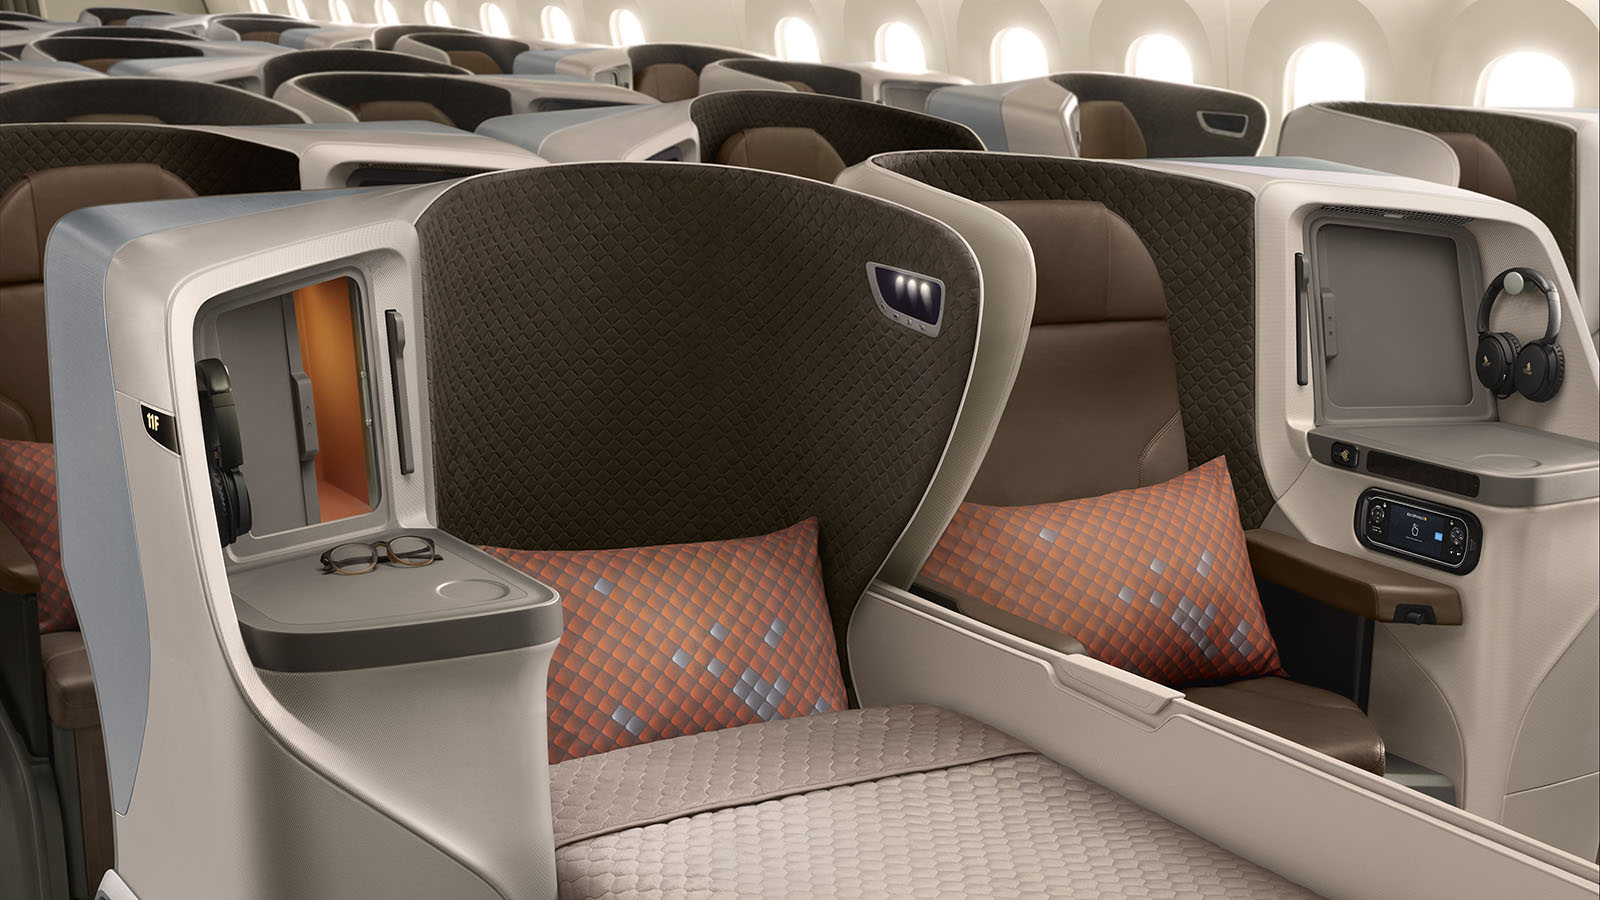 Singapore Airlines Airbus Boeing 787-10 Business Class